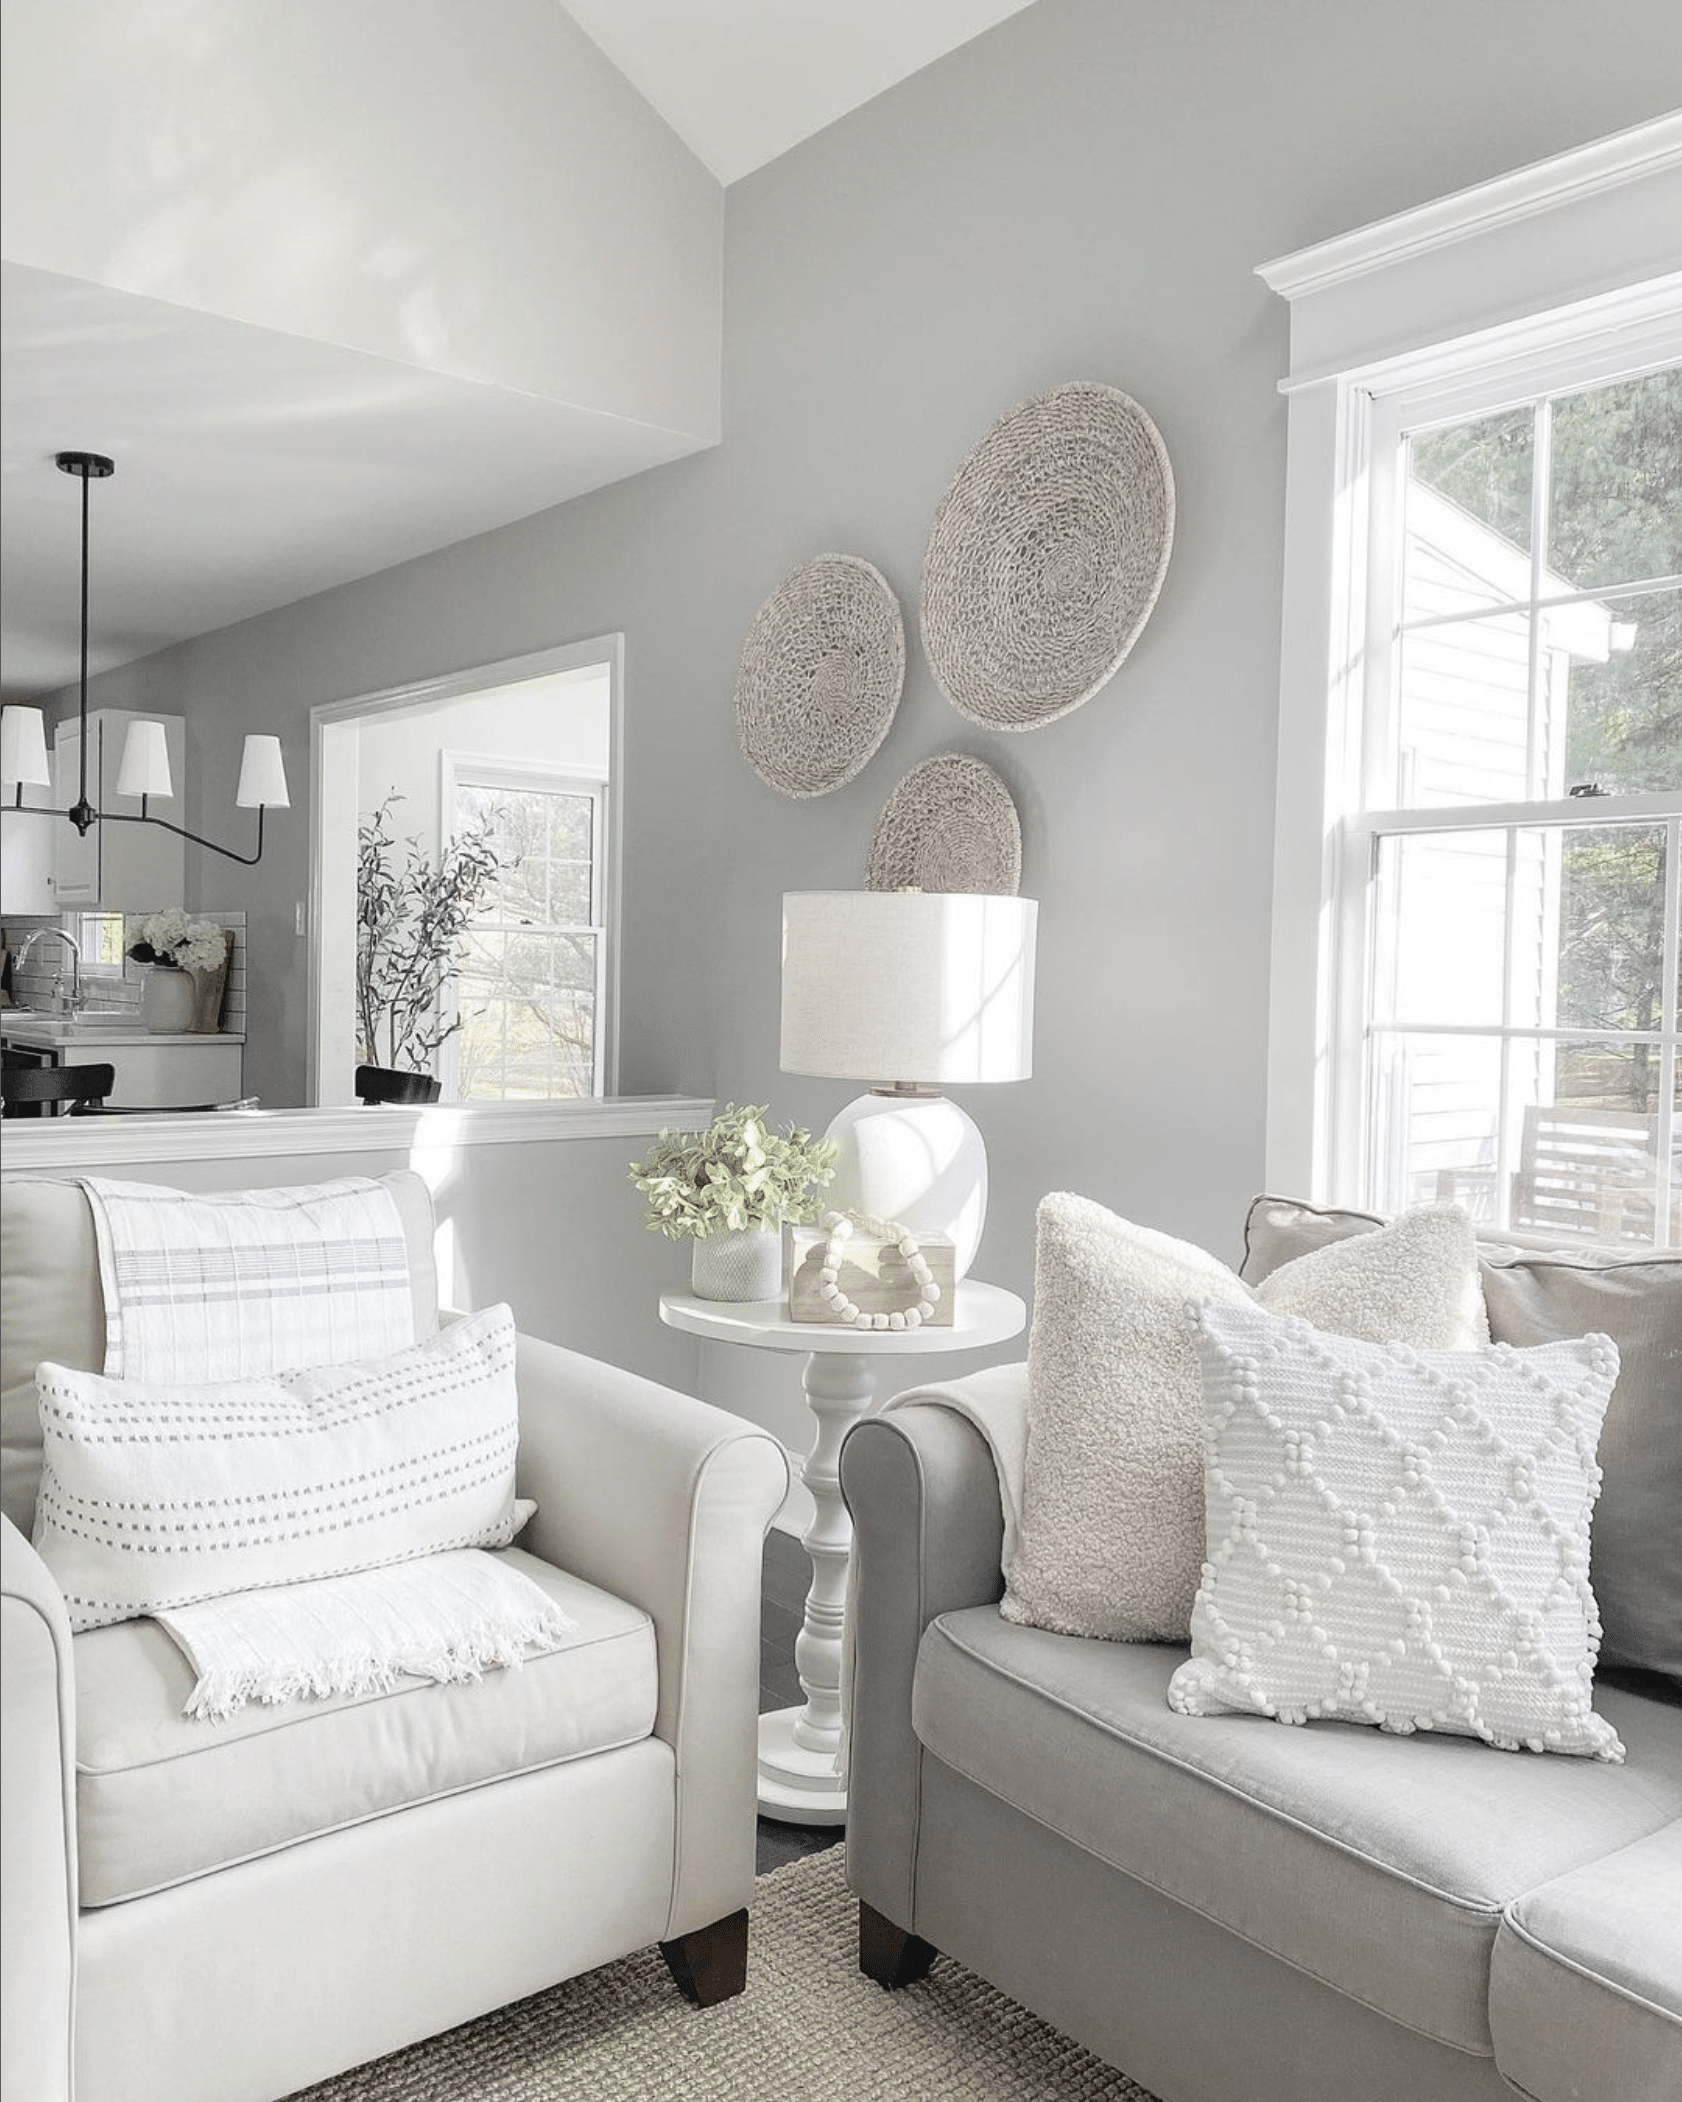 Stonington Gray living room walls with neutral sofas and baskets hanging on the walls.